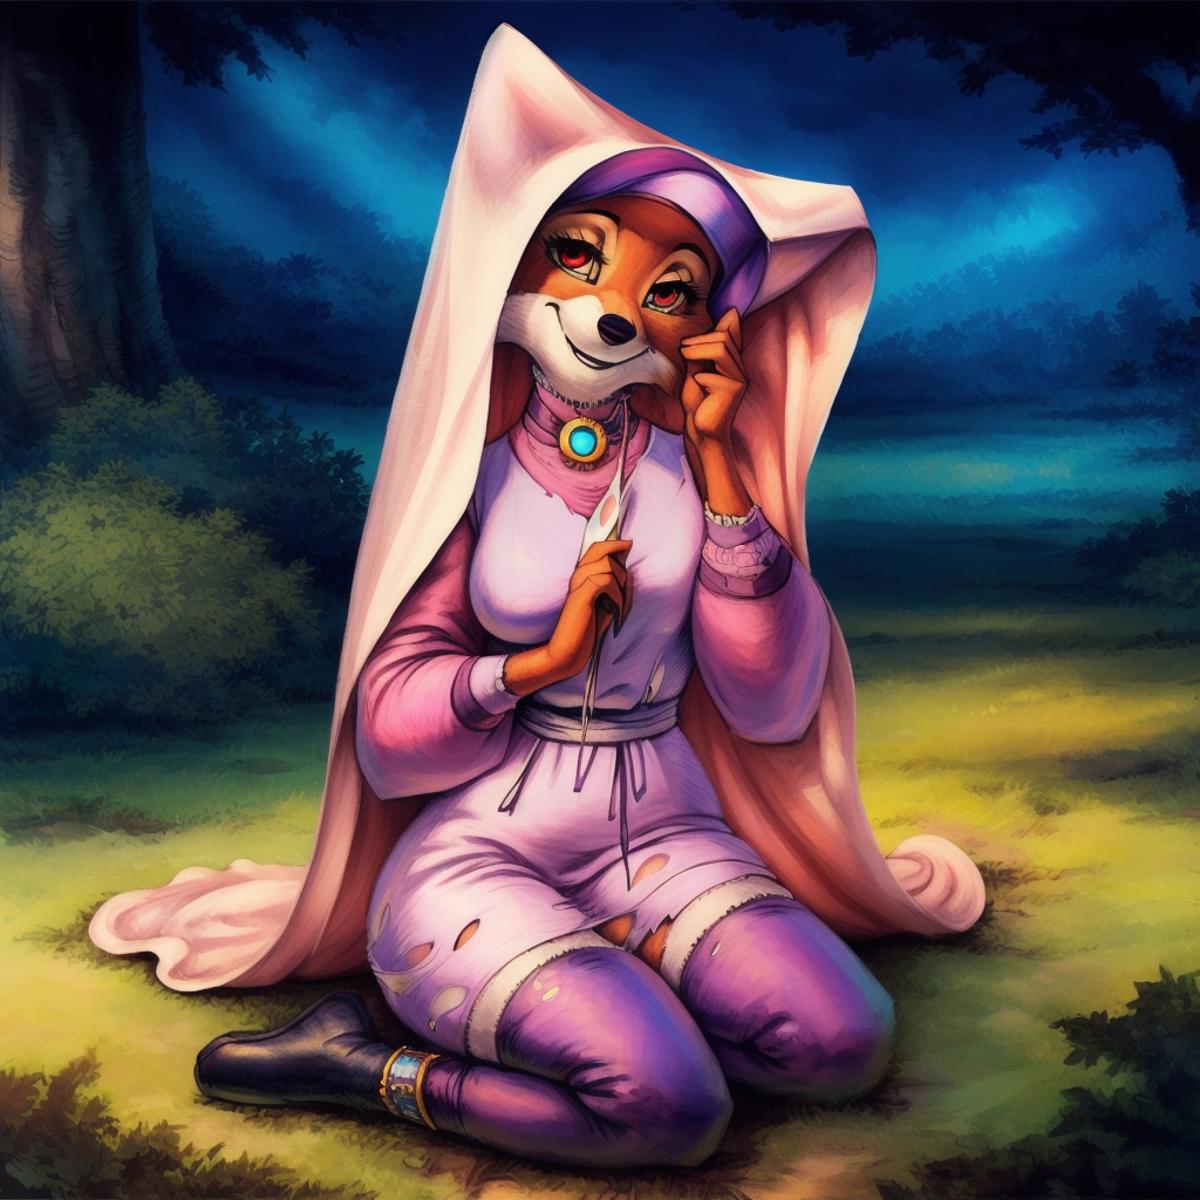 Maid Marian image by Steeltron2000